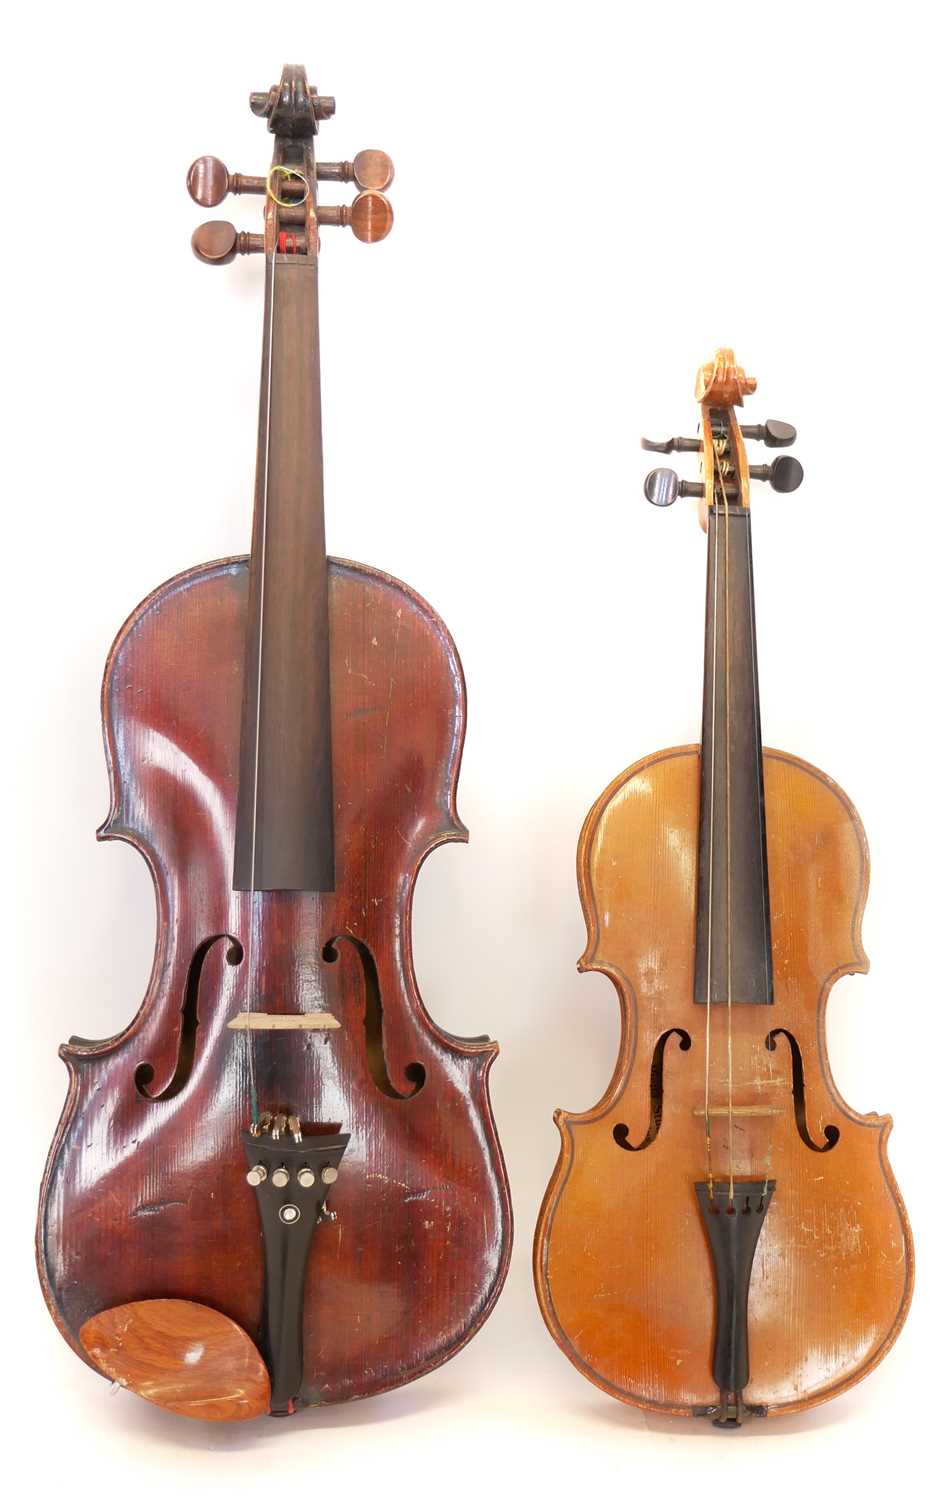 4/4 violin and a 1/2 size violin, each with a bow and case.